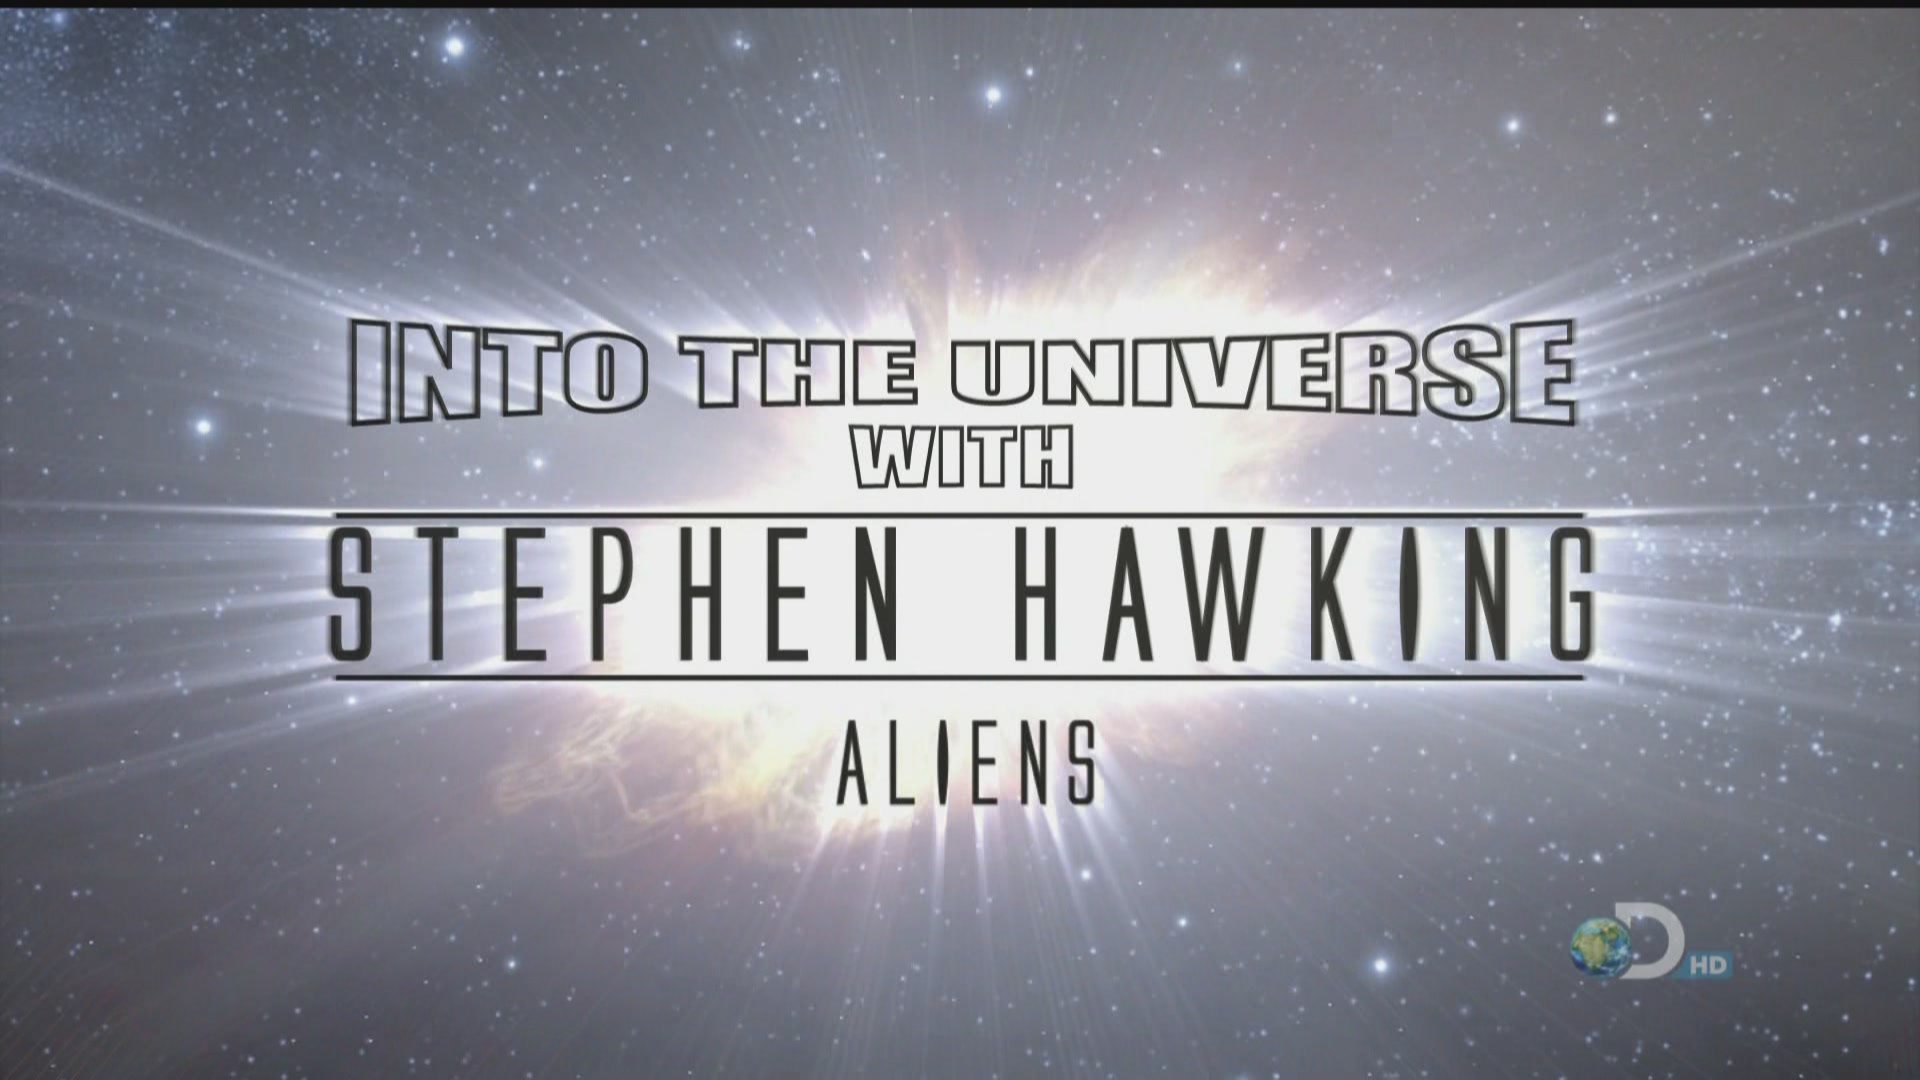 Into the Universe With Stephen Hawking S01E01 Aliens.JPG